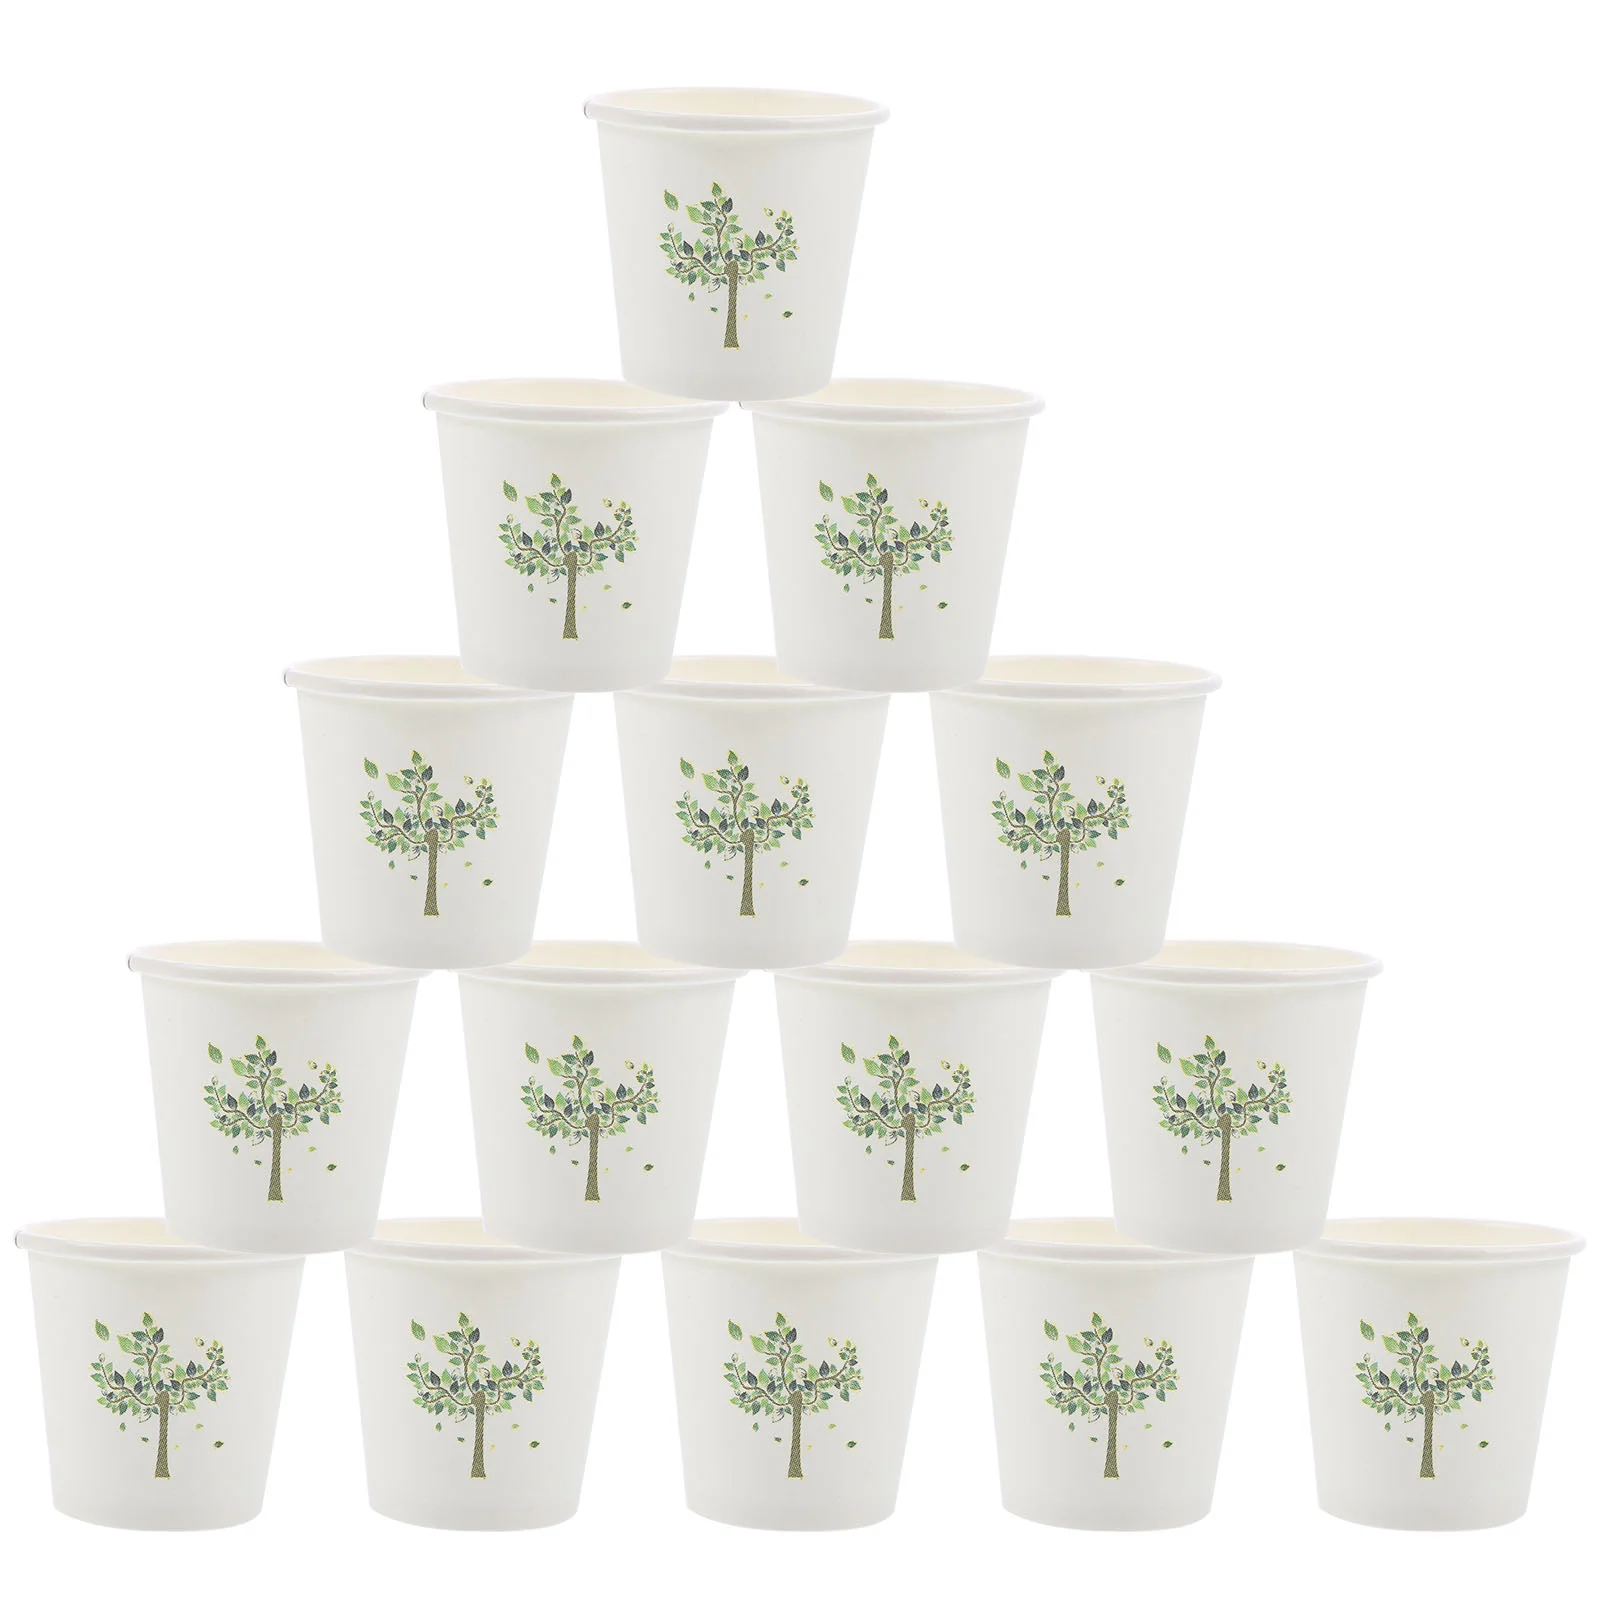 

500 Pcs Tasting Cup 3 Oz Cups Water Glasses Paper 3oz Bathroom Small Disposable Juice Rinse